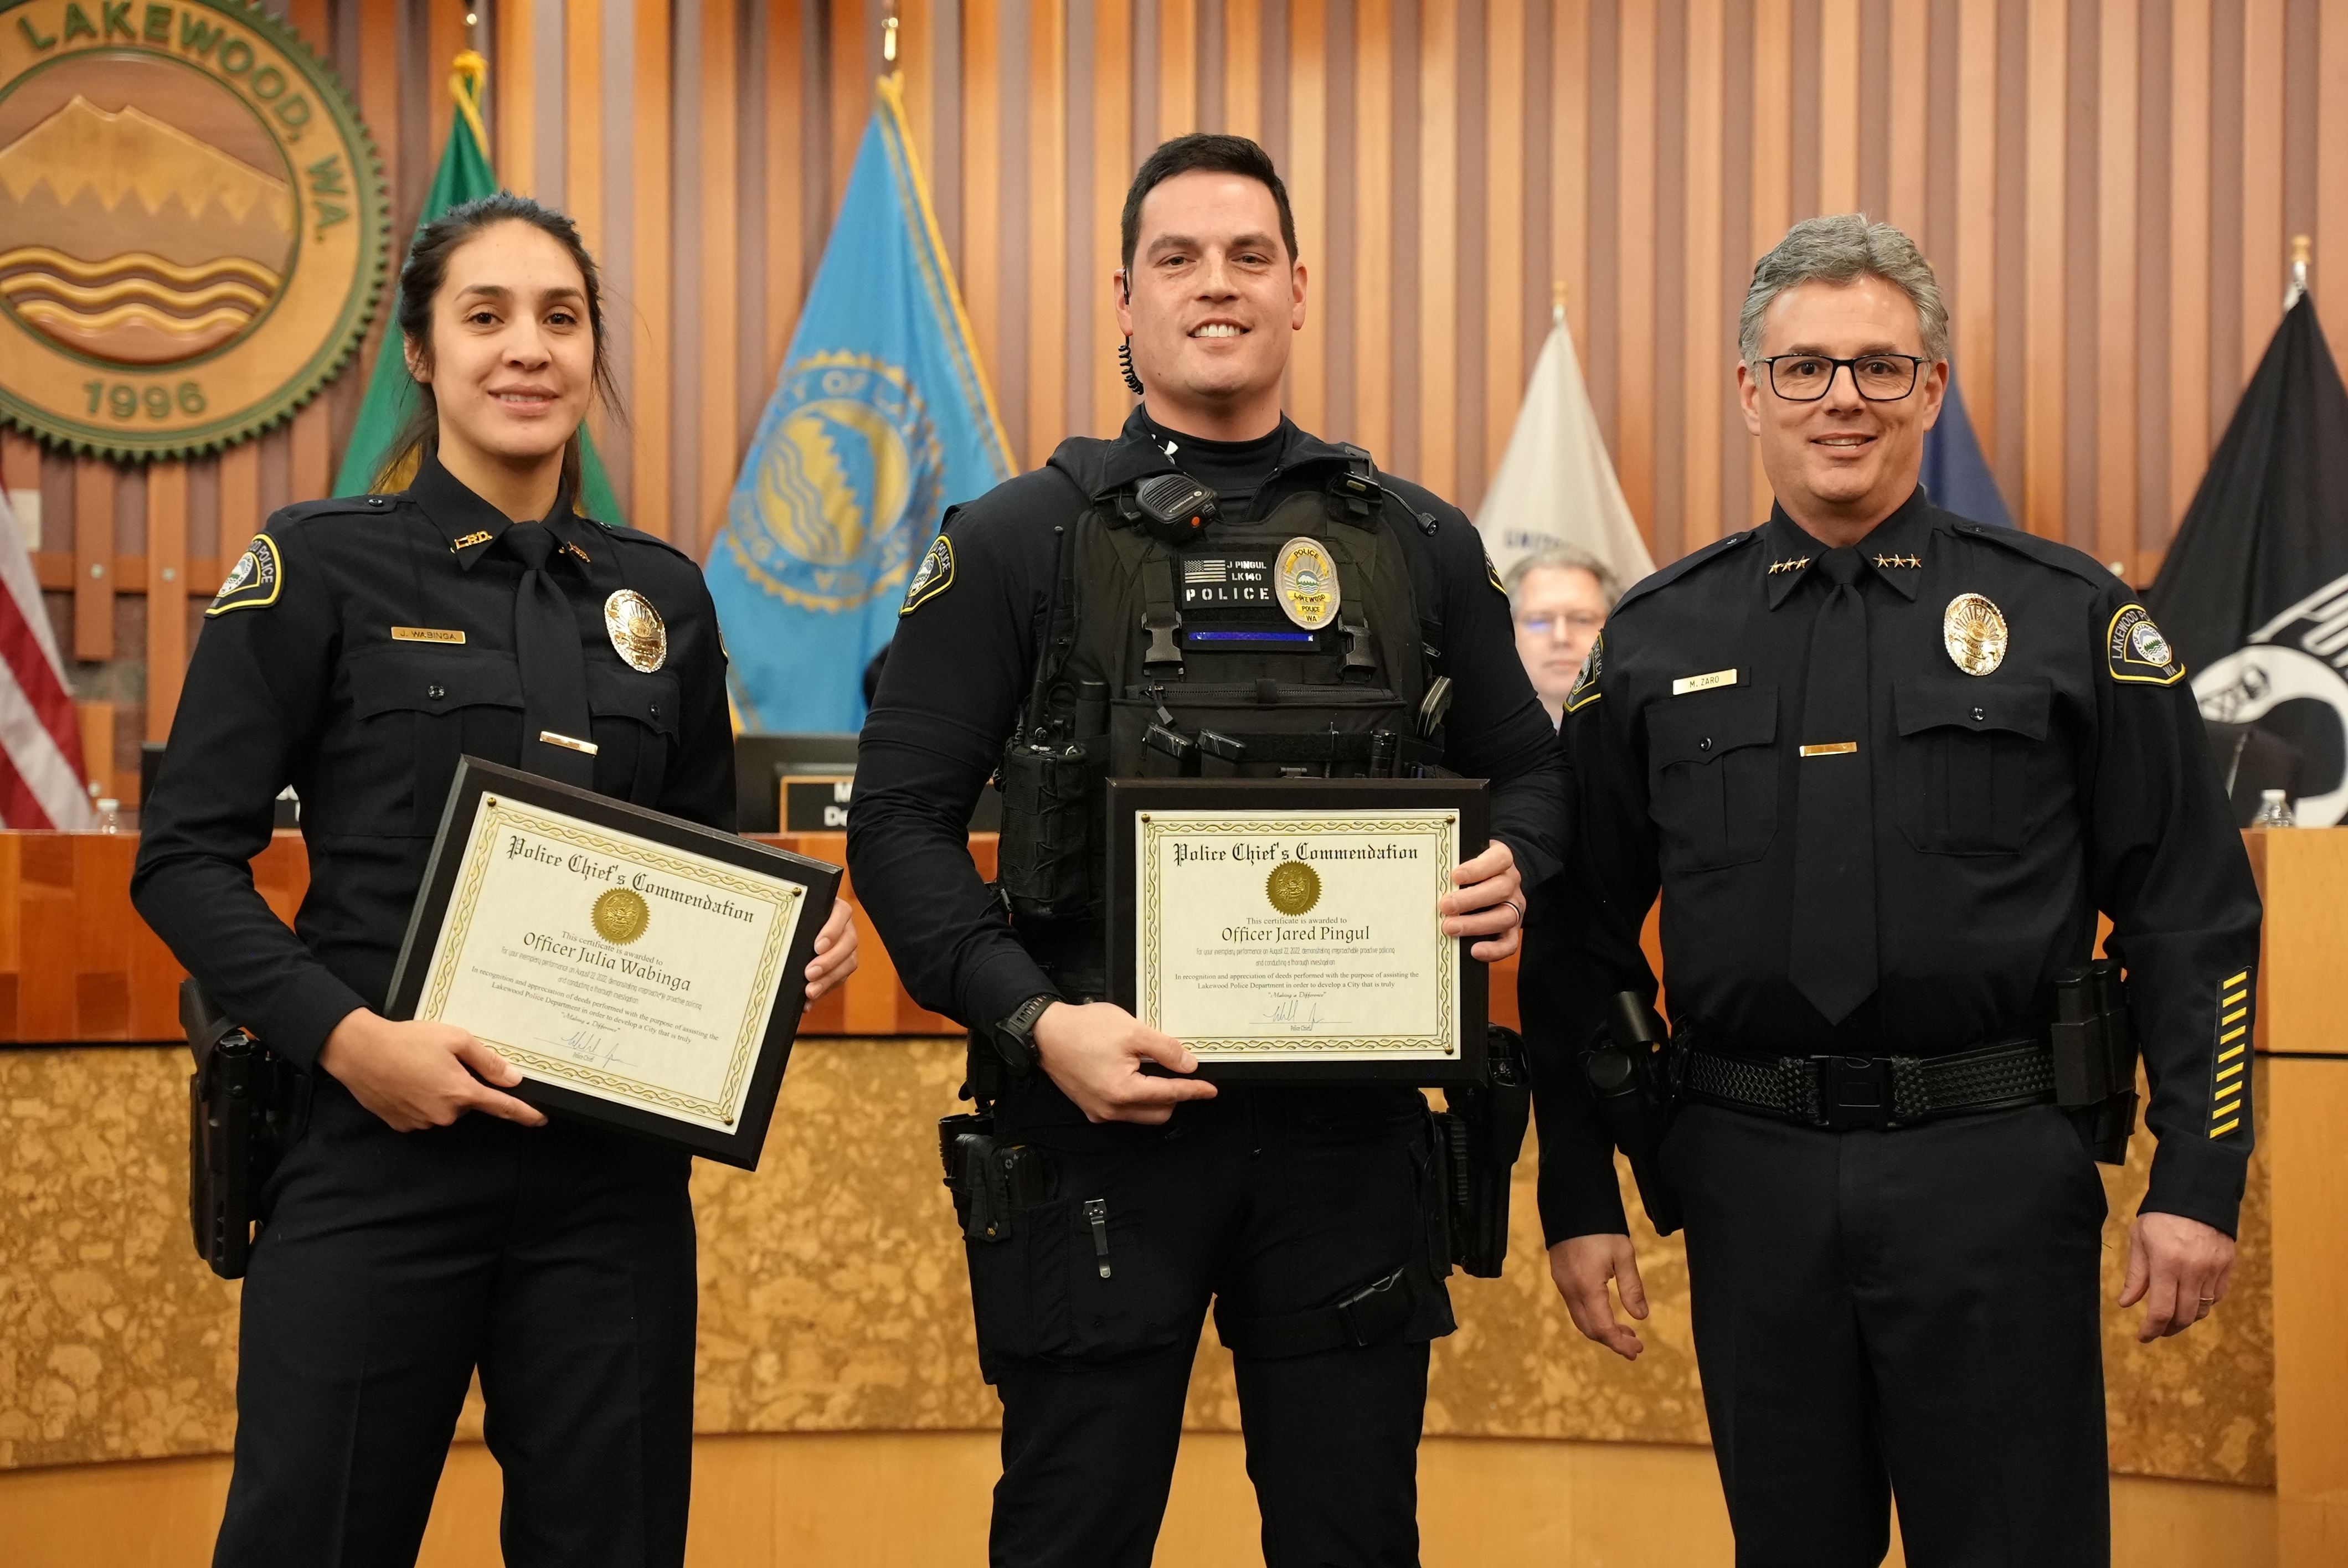 Officers Julia Wabinga and Jared Pingul earn a Police Chief's Commendation award.